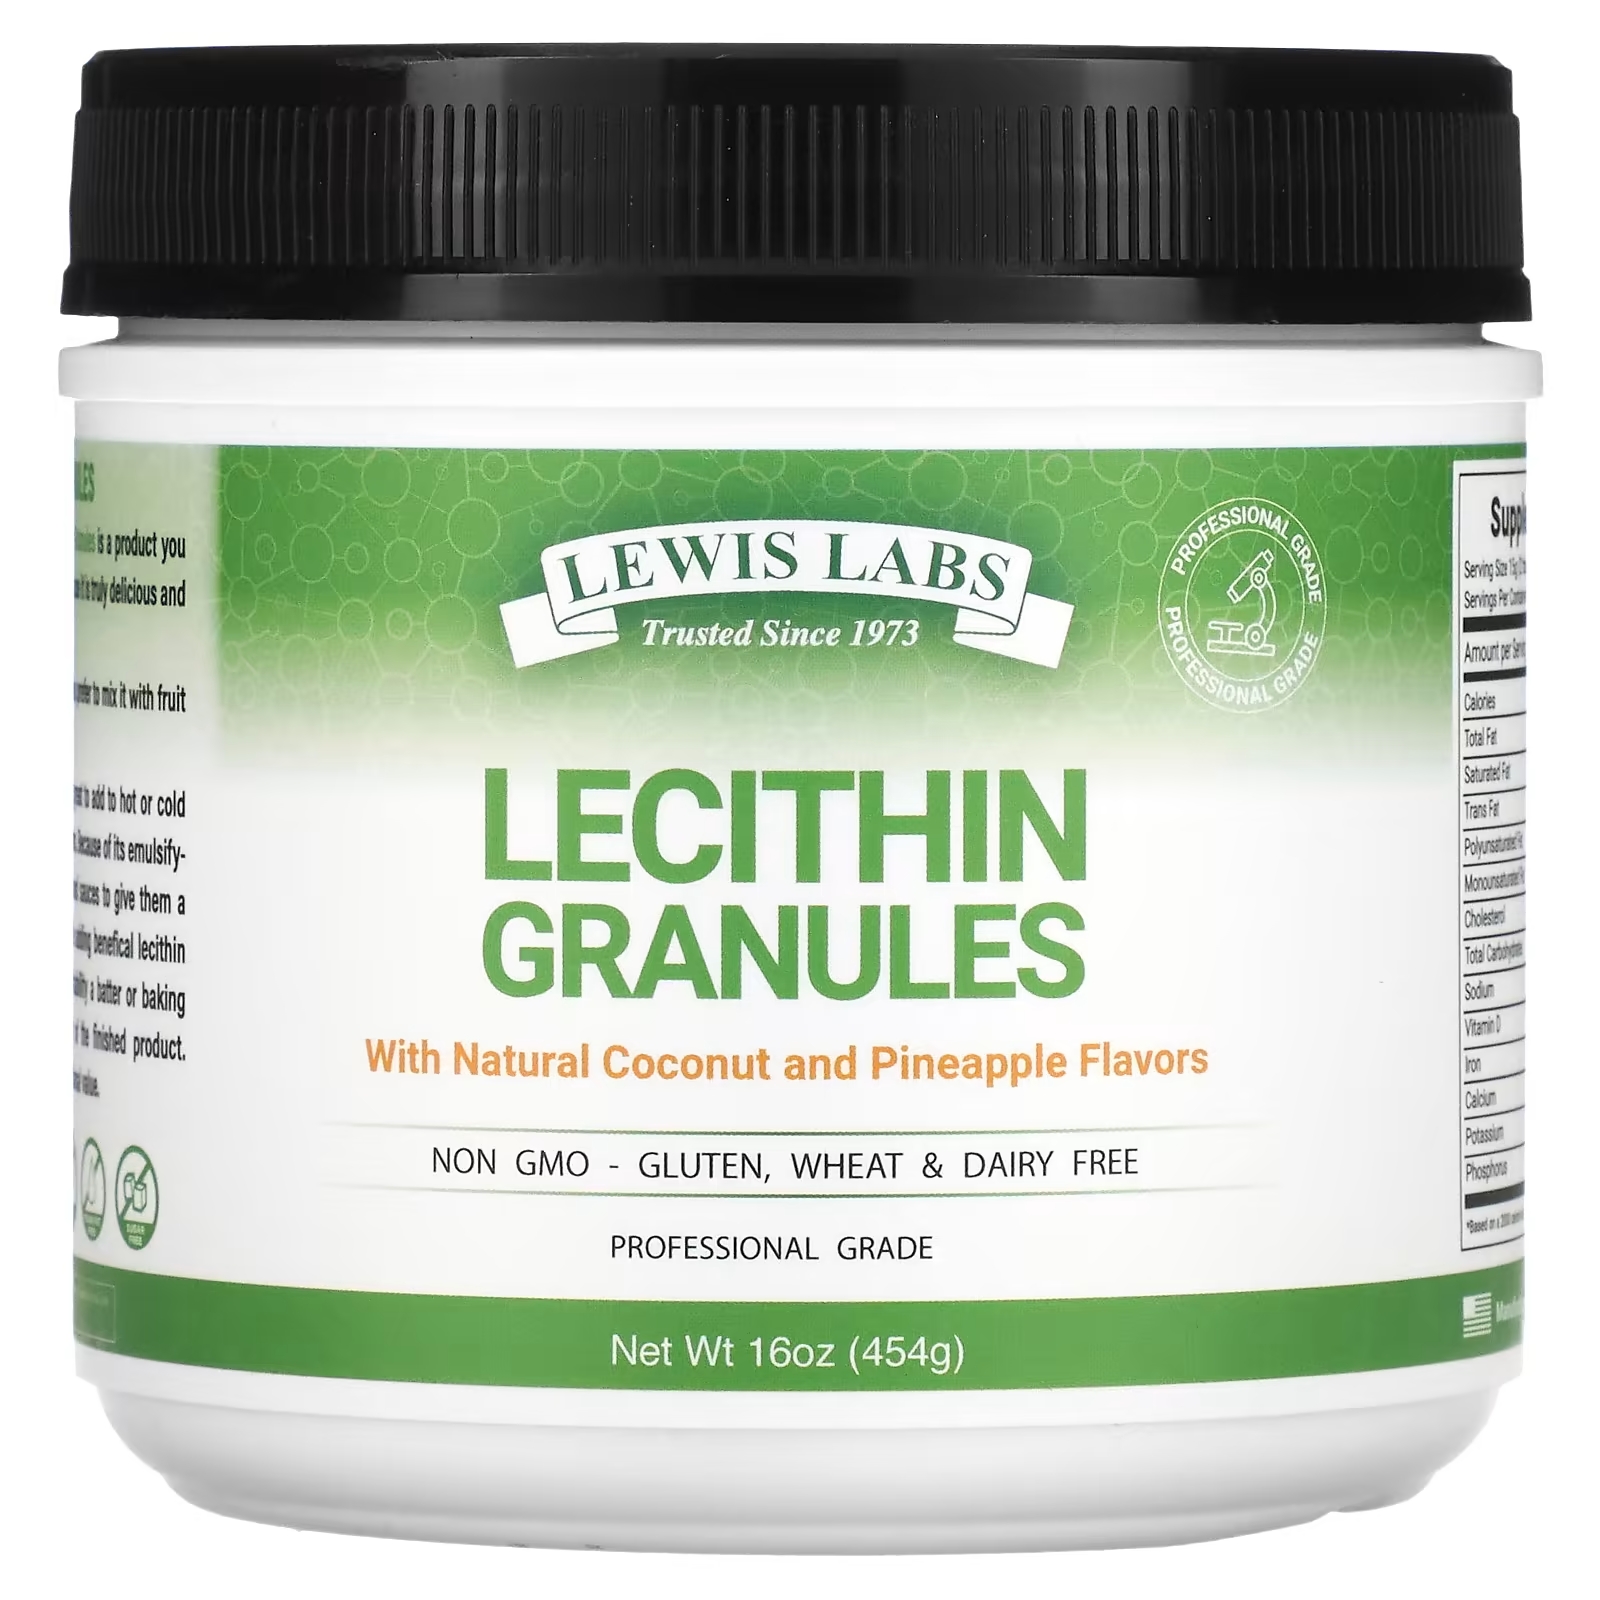 Lewis Labs Lecithin Granules Natural Coconut and Pineapple, 454г